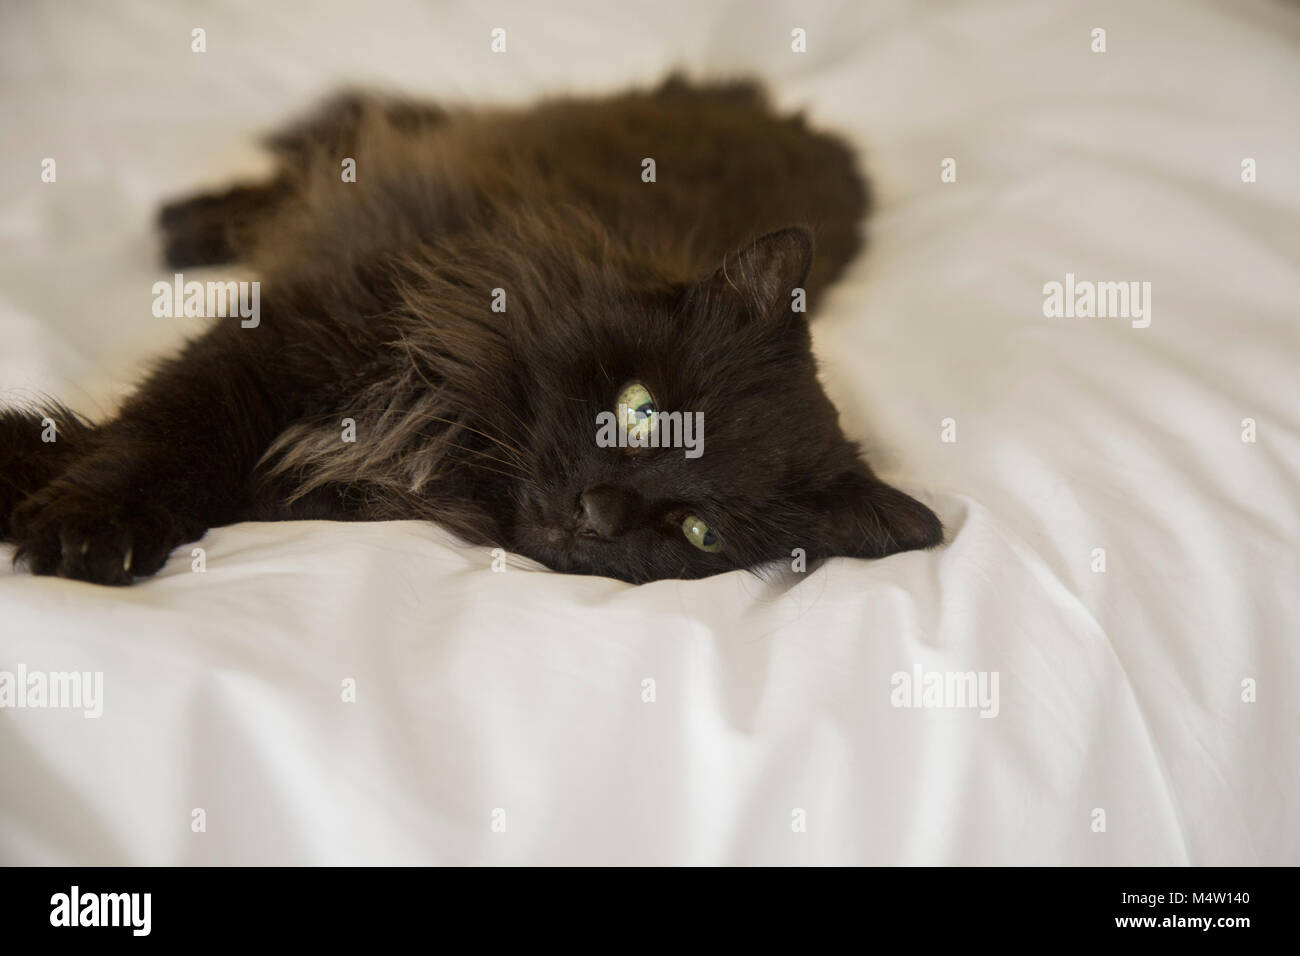 Long haired black cat lying on a white duvet cover on a bed. Stock Photo